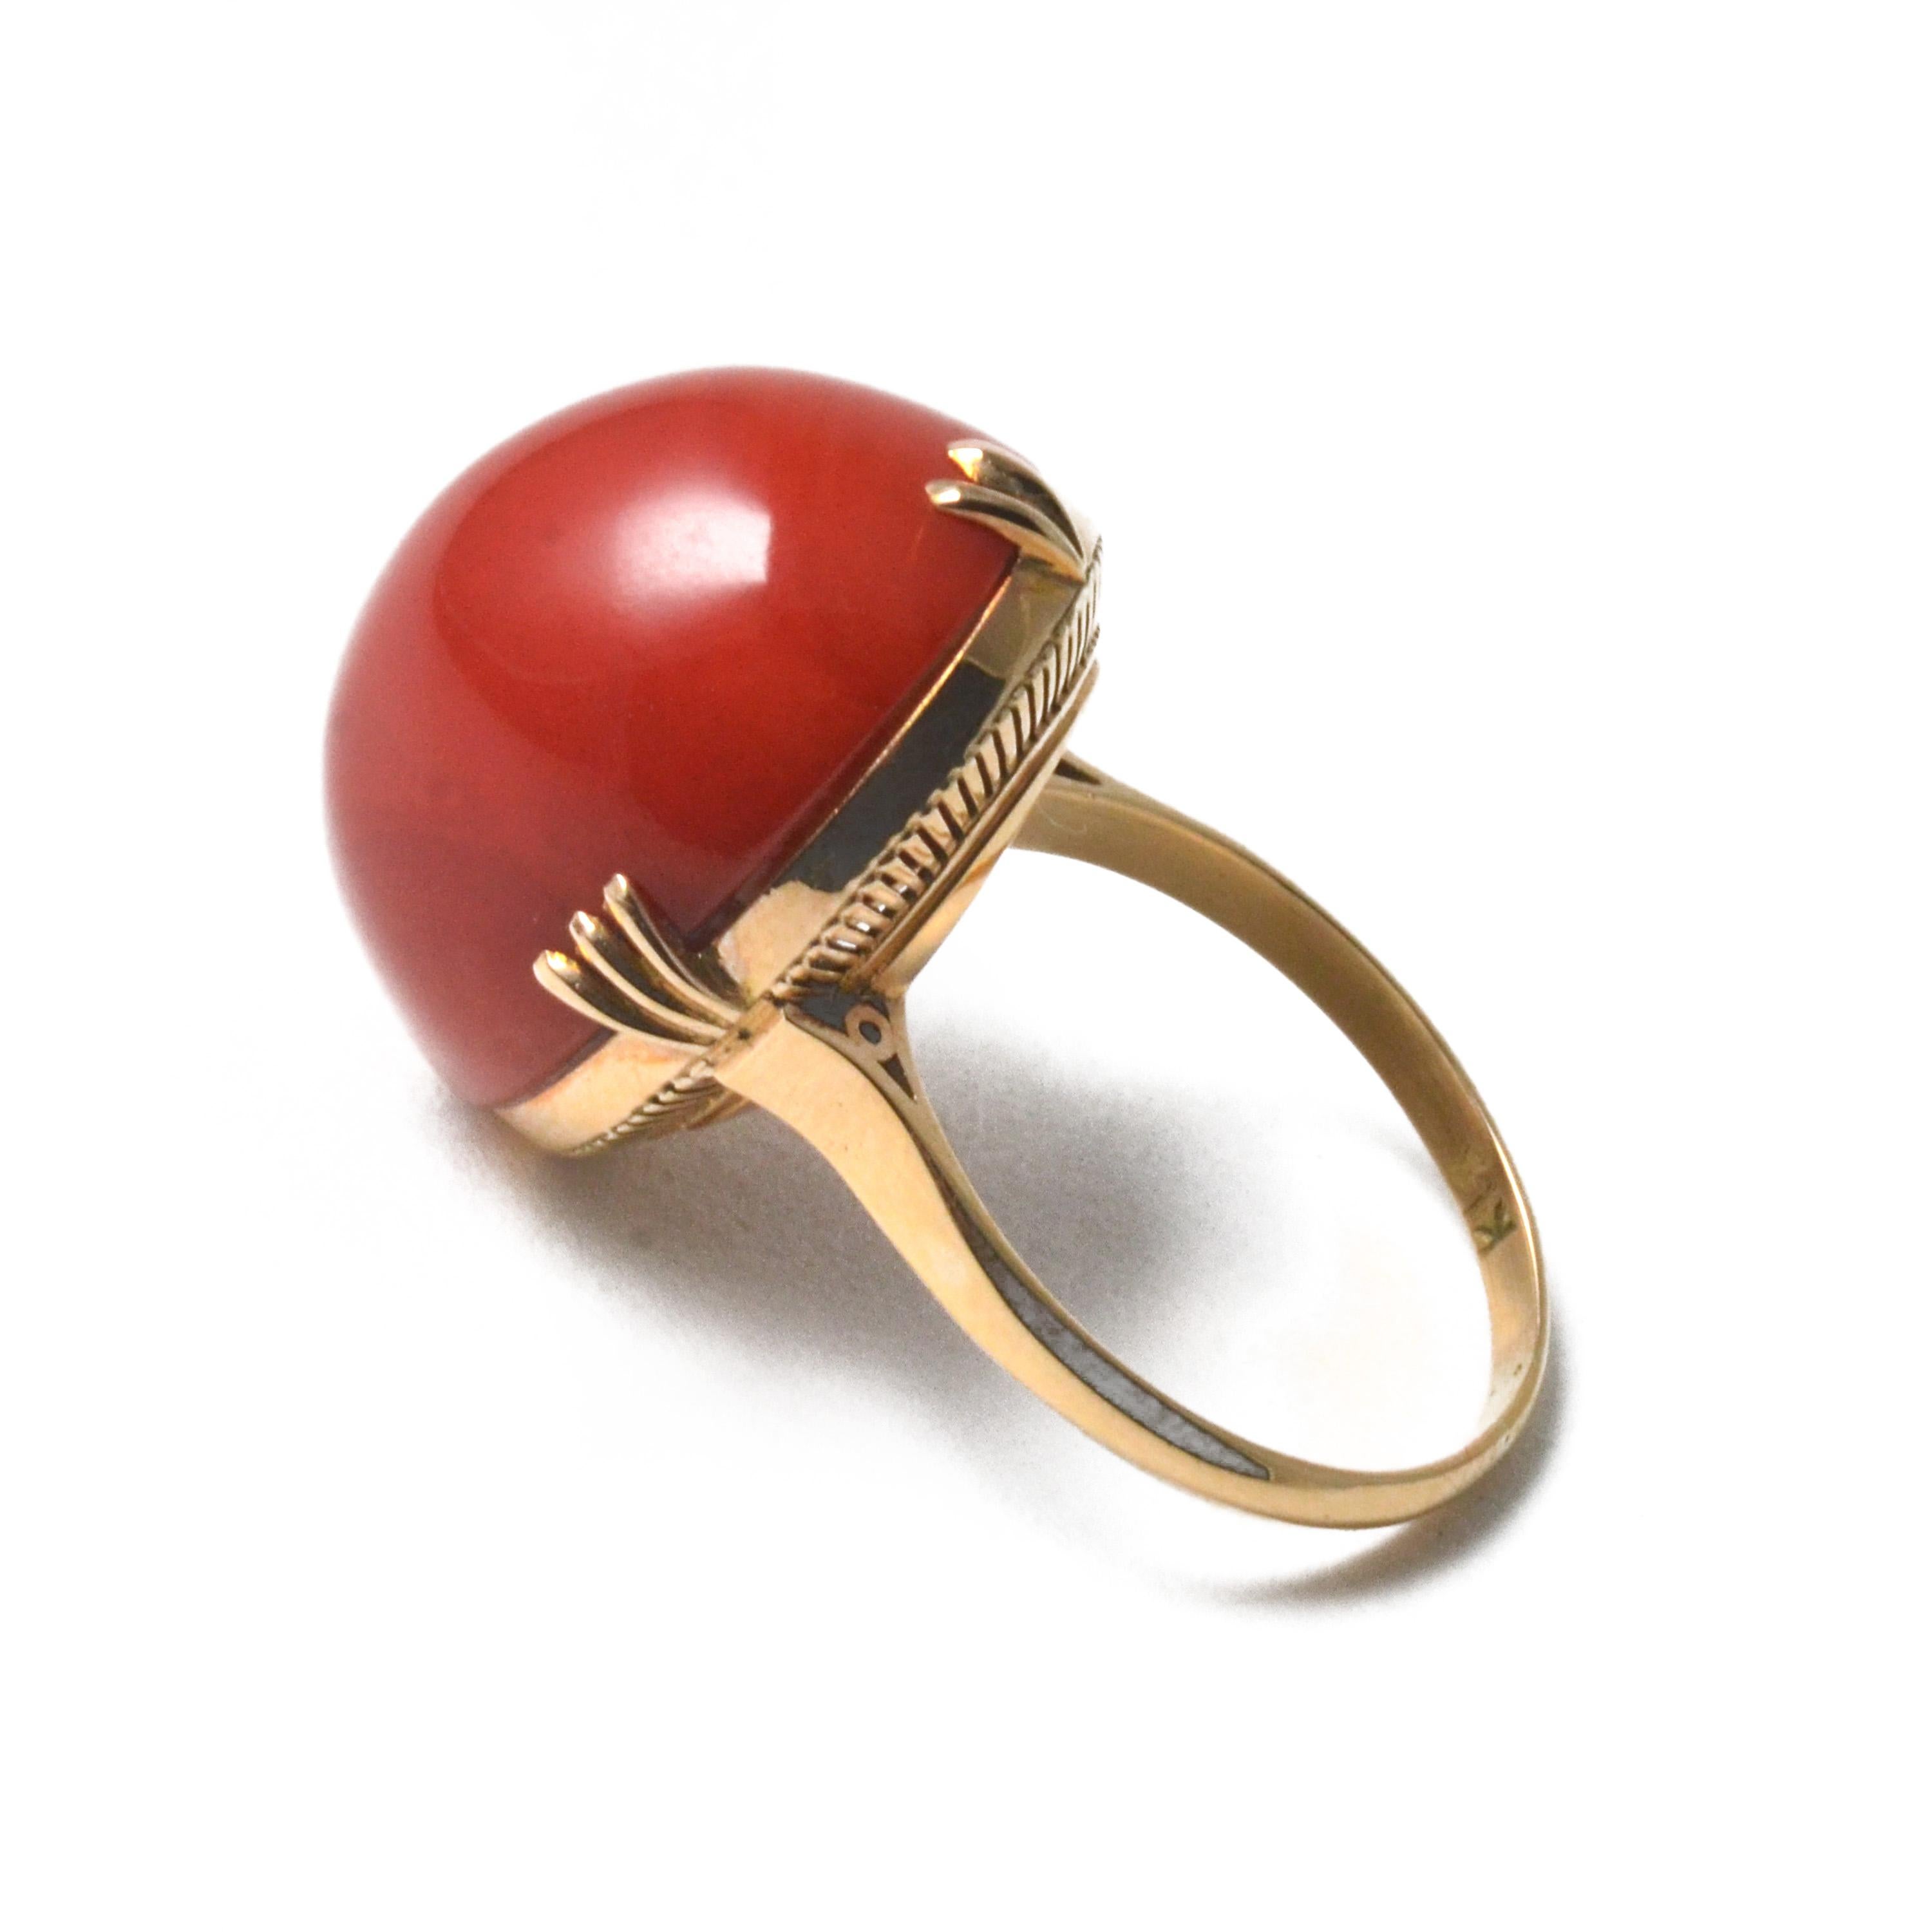 This vintage ring is crafted in 18 karat yellow gold with Chiaka Sango (oxblood coral). The coral is approximately 19 mm wide and matches well with the brilliance of 18 karat yellow gold. This loose coral was made by taking the required dimensions